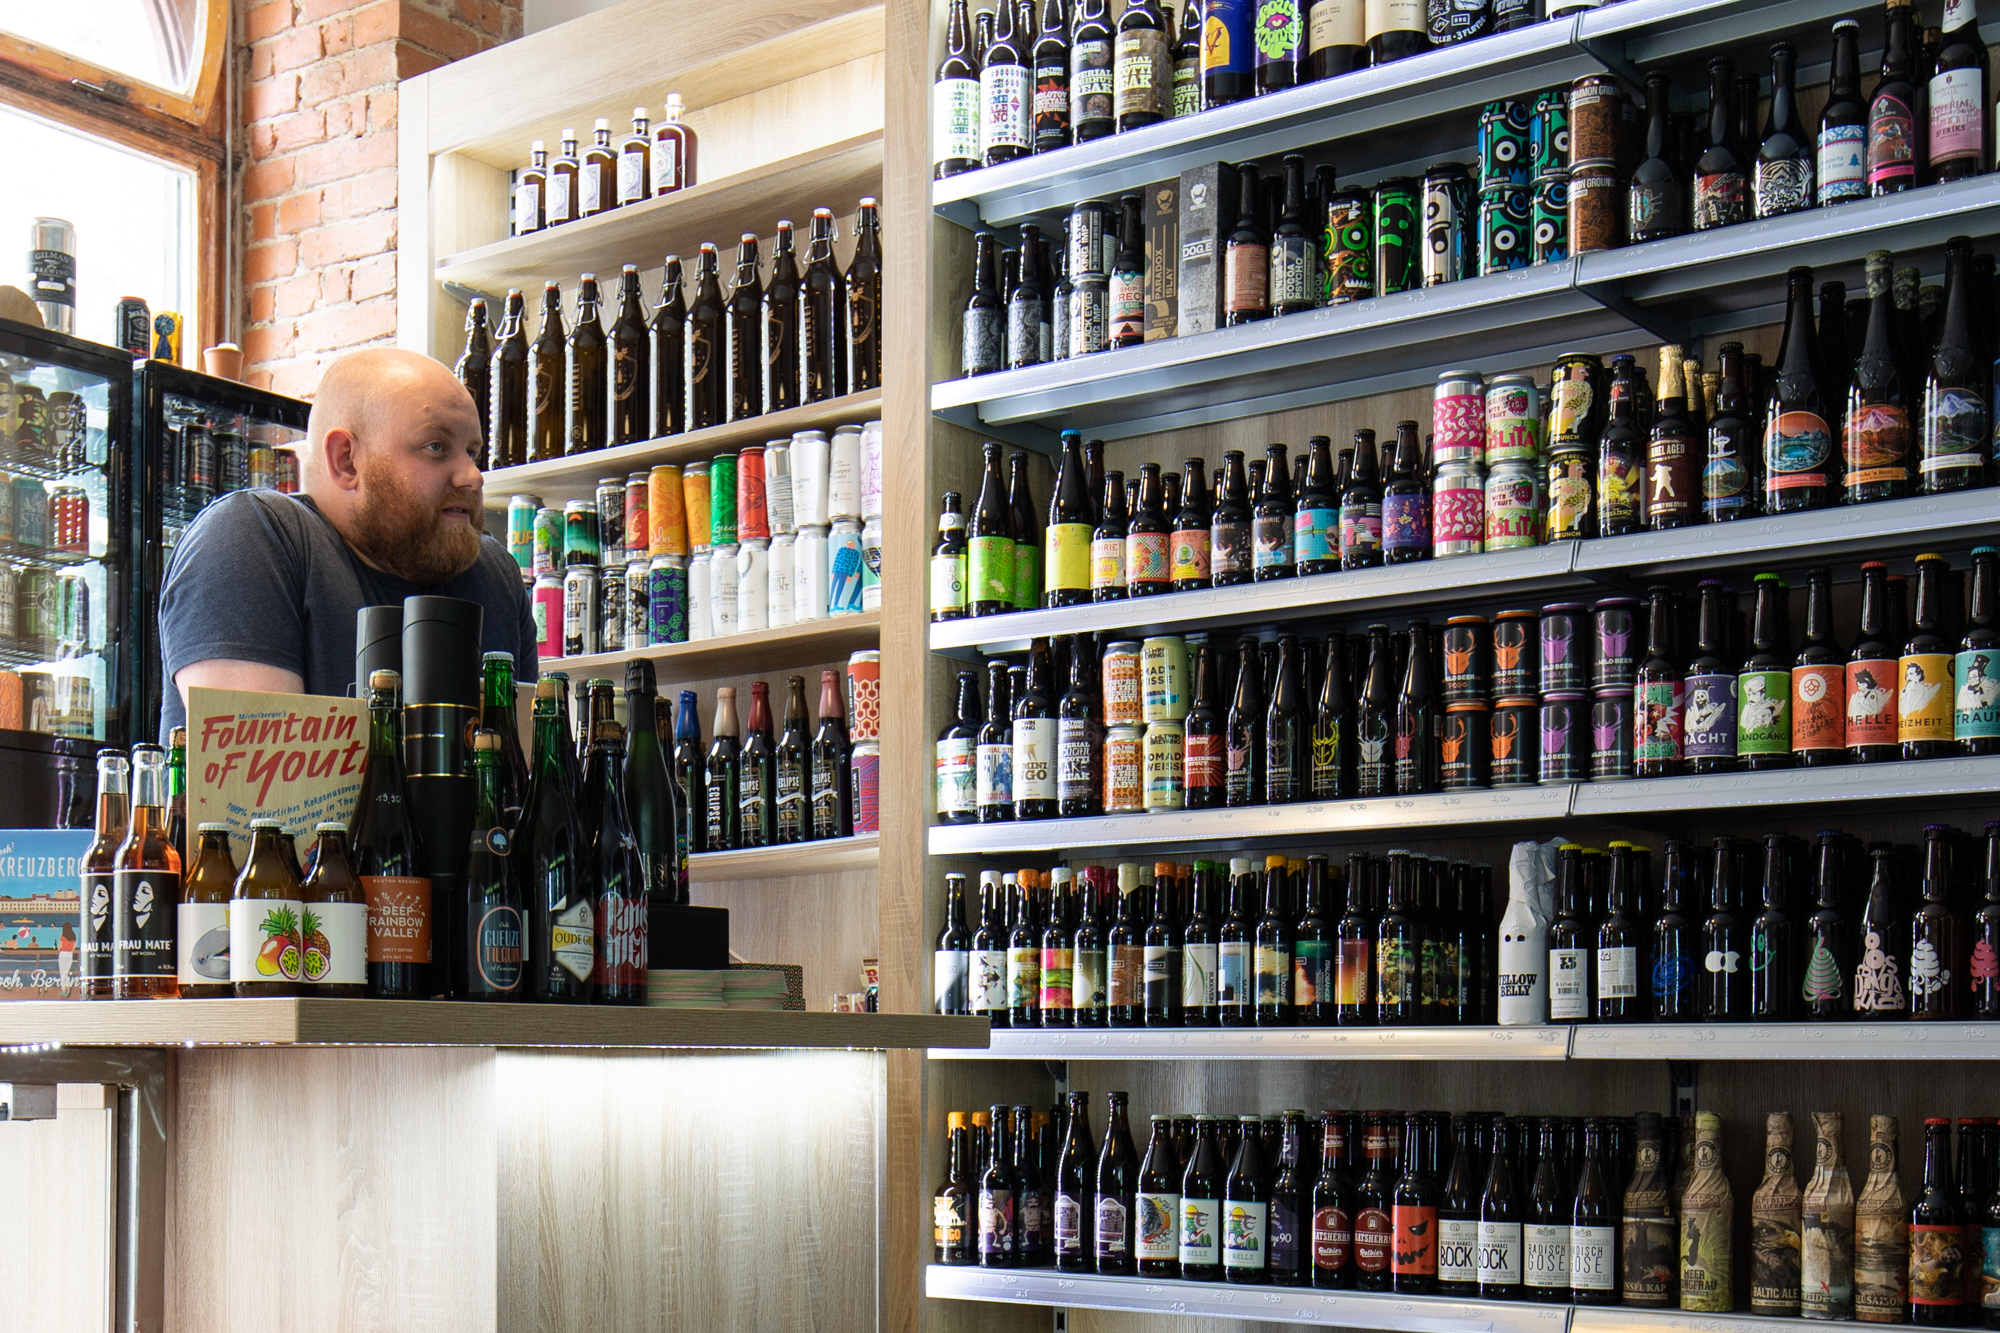 Biererei Store - Craft Beer Bottle Shop and Aladdin's Cave - Berlin Love